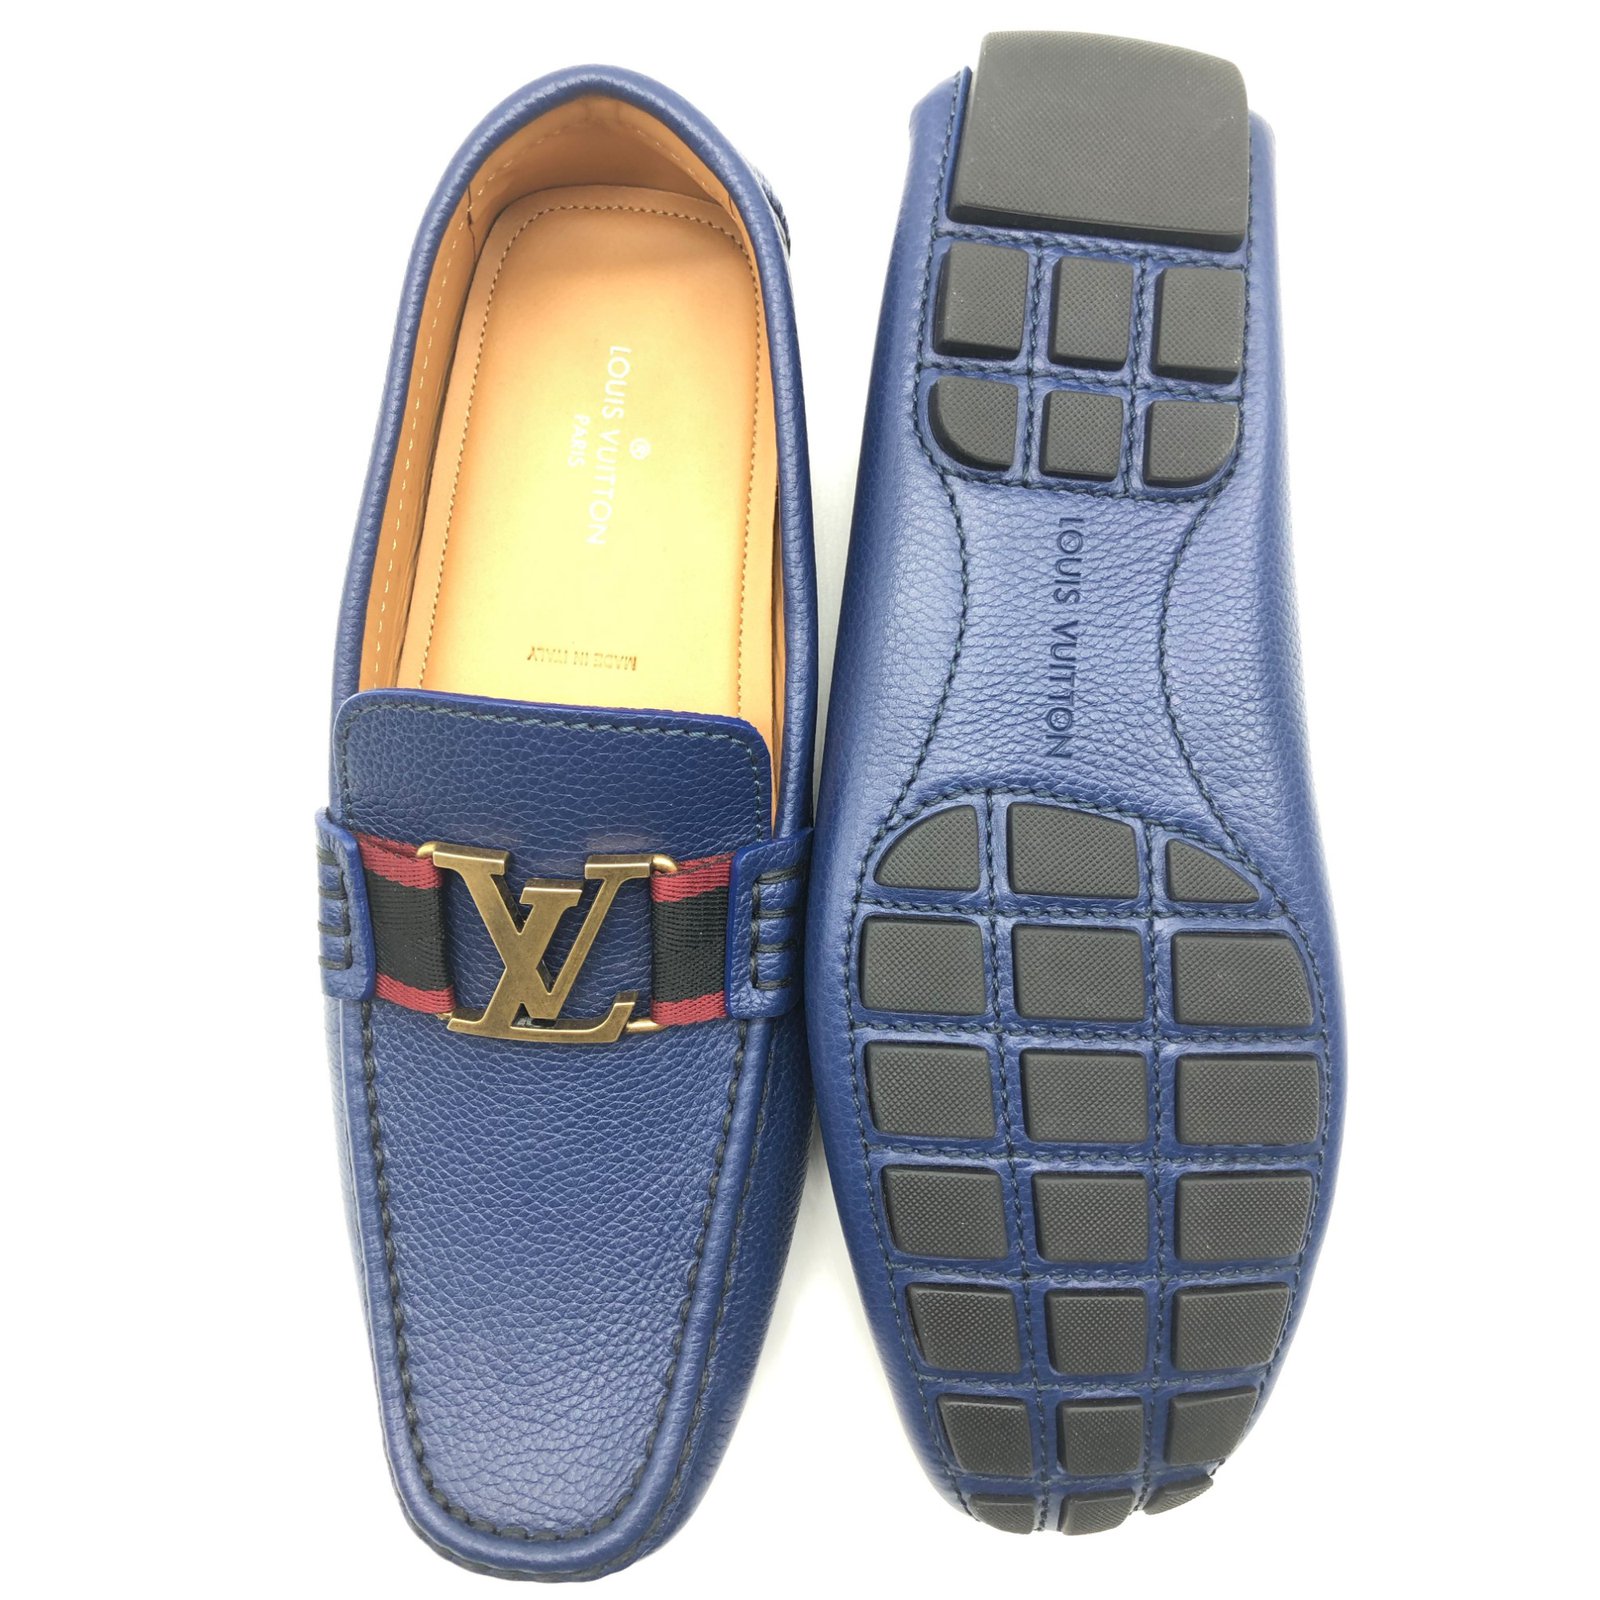 Louis Vuitton Men's Monte Carlo Moccasin Loafers Leather Blue 2080191